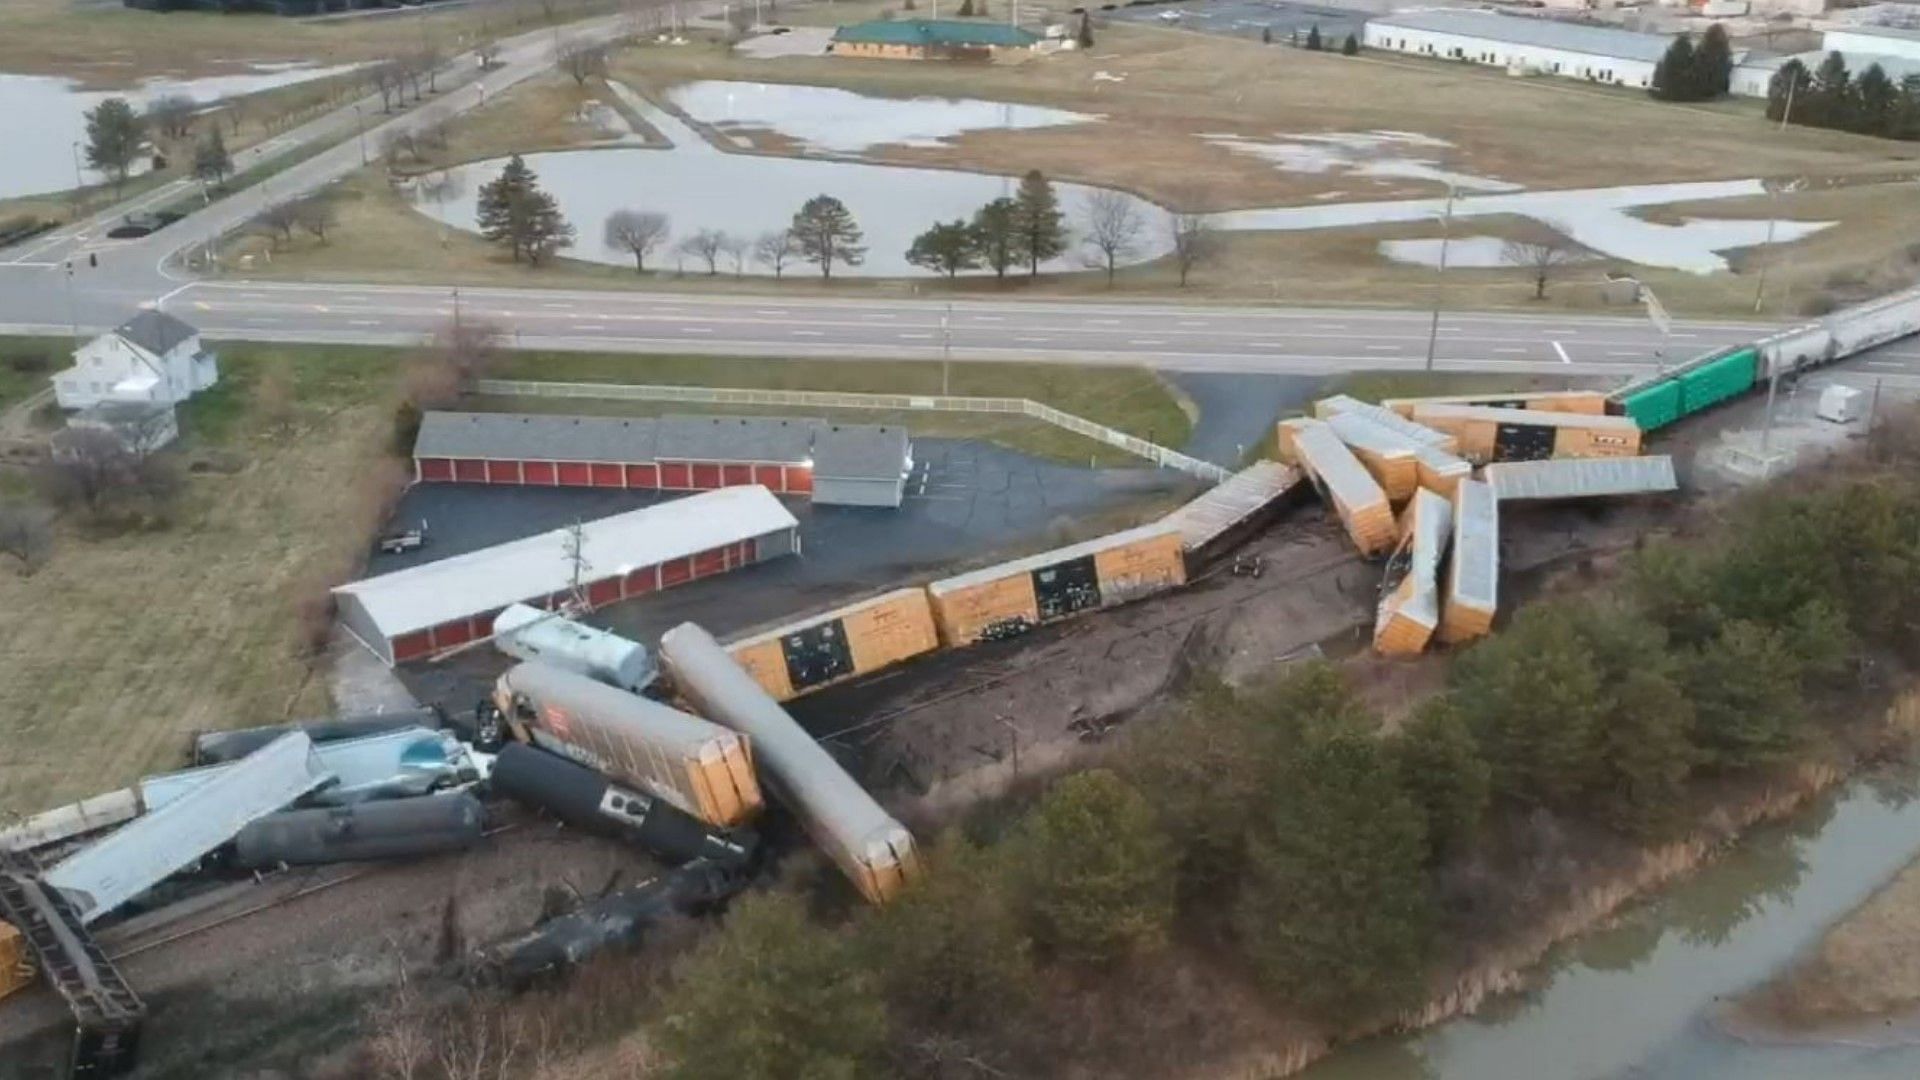 Another train derailment takes place, this time in Ohio (Image via Twitter)